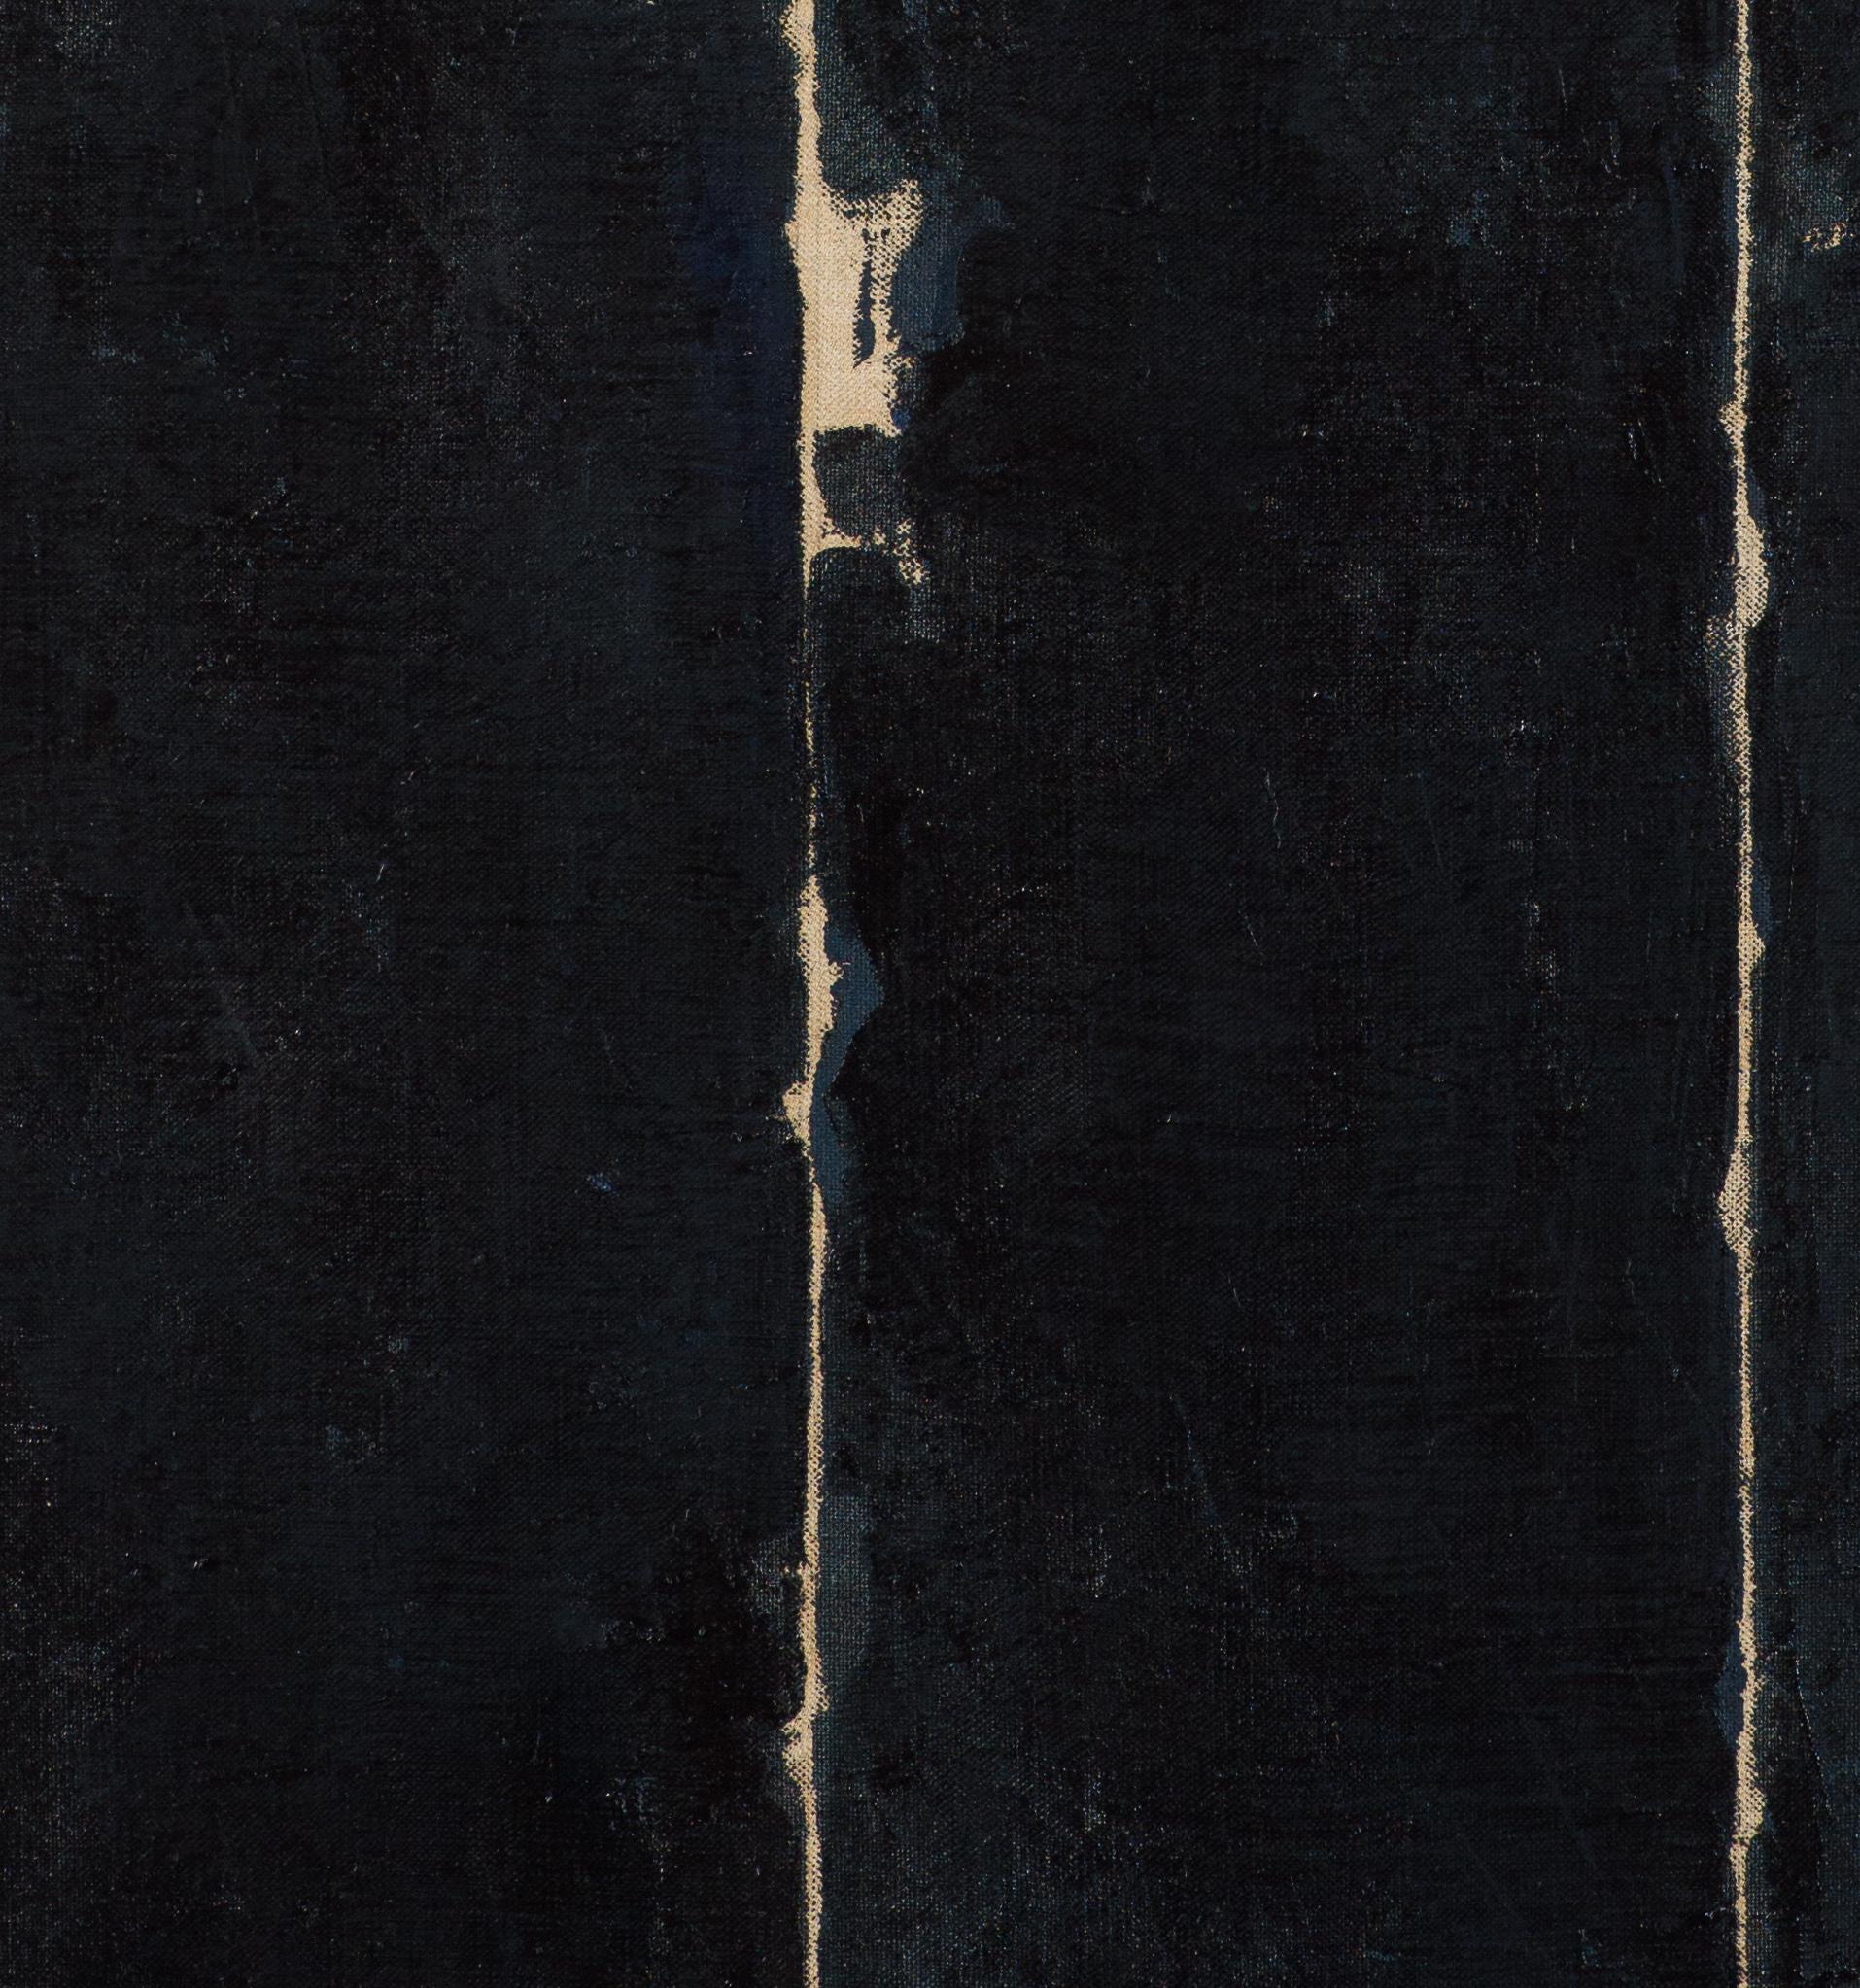 1978 (black) - Black Abstract Painting by Mala Breuer